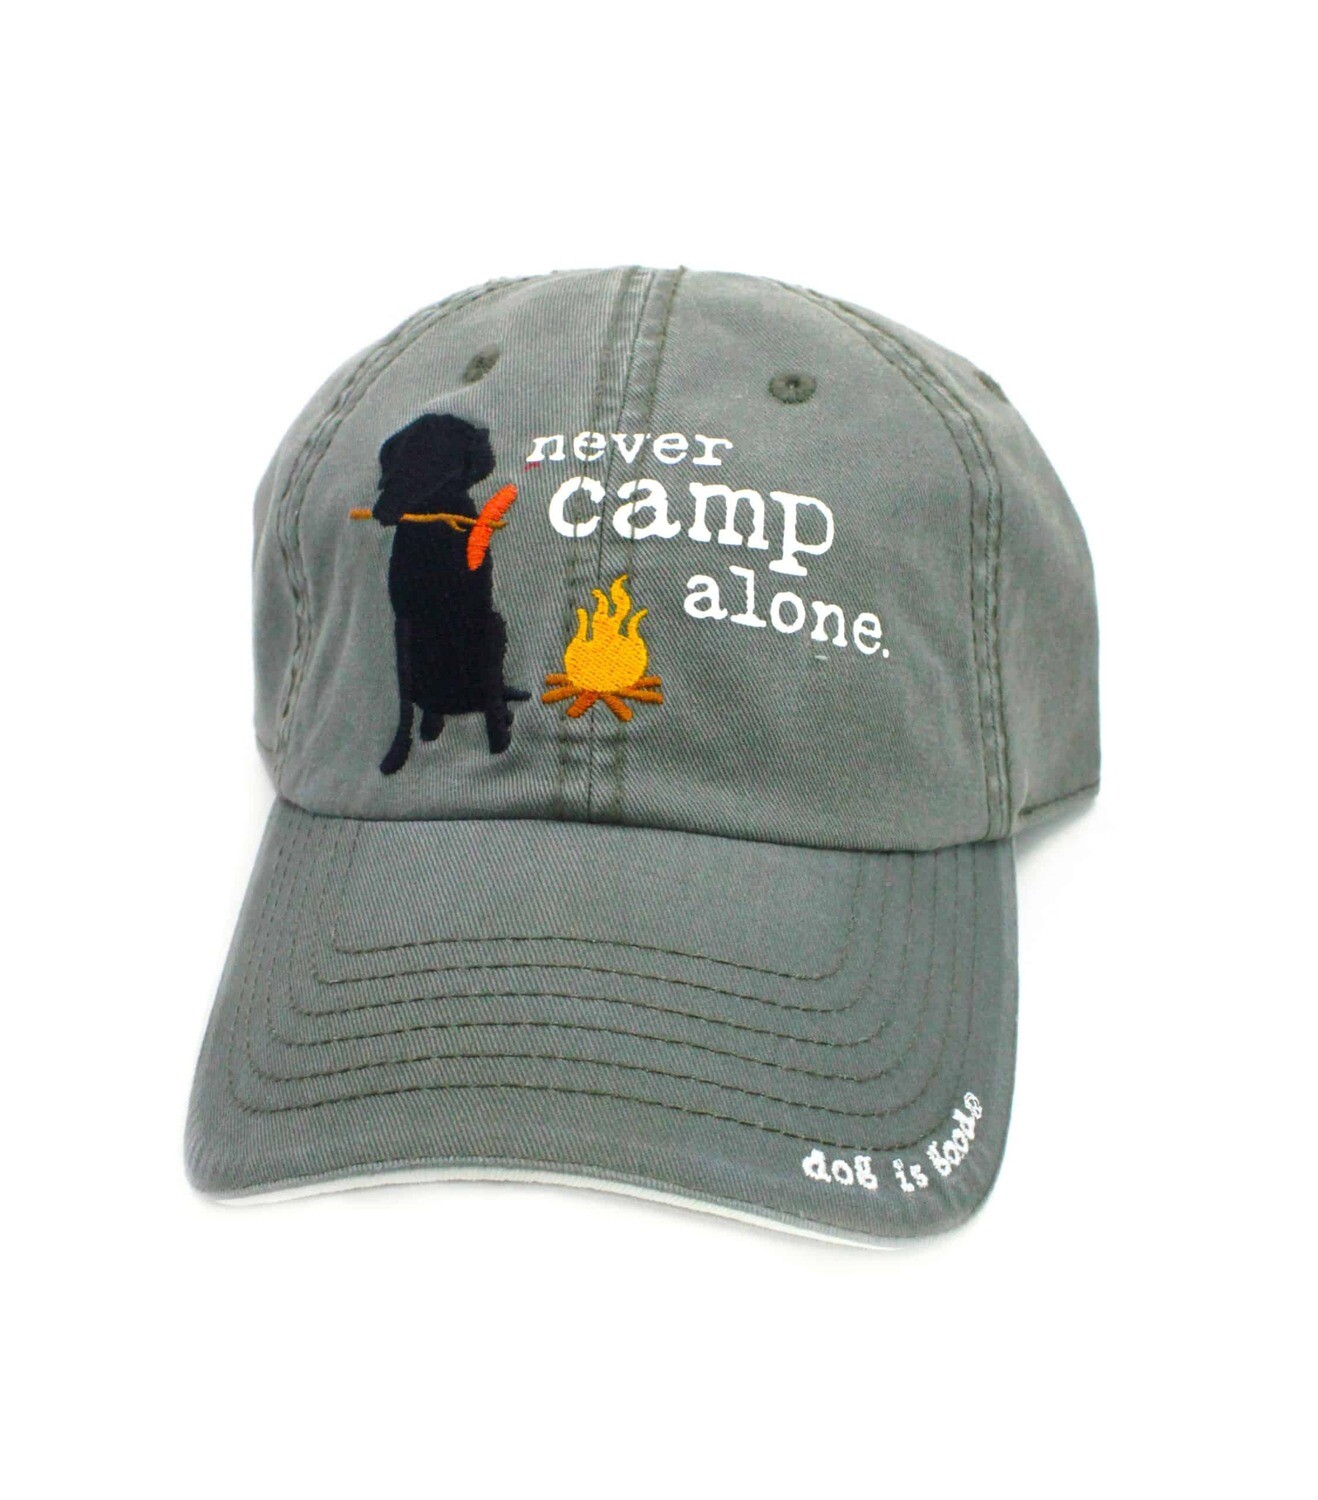 Dog is Good Hat: Never Camp Alone GREEN